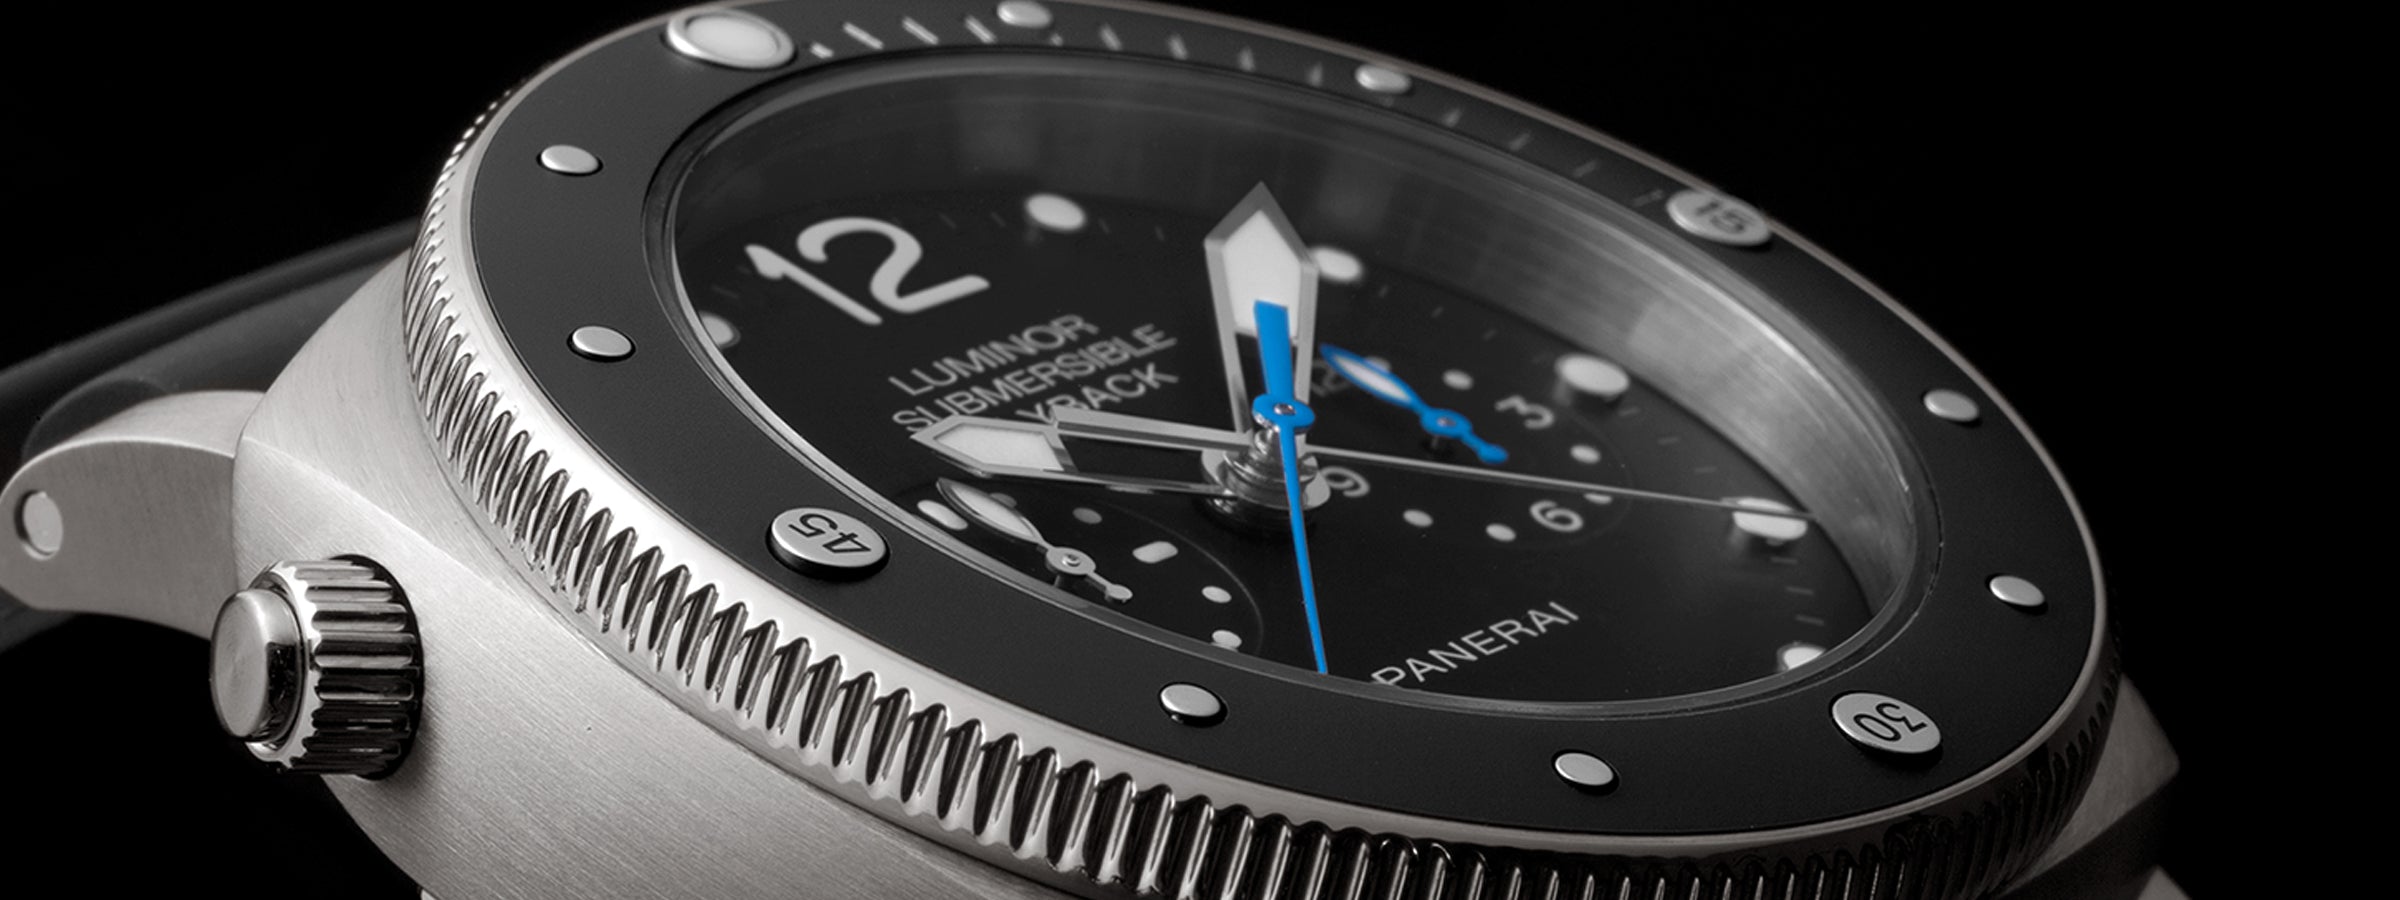 Key Features That Make Men's Panerai Watches Stand Out